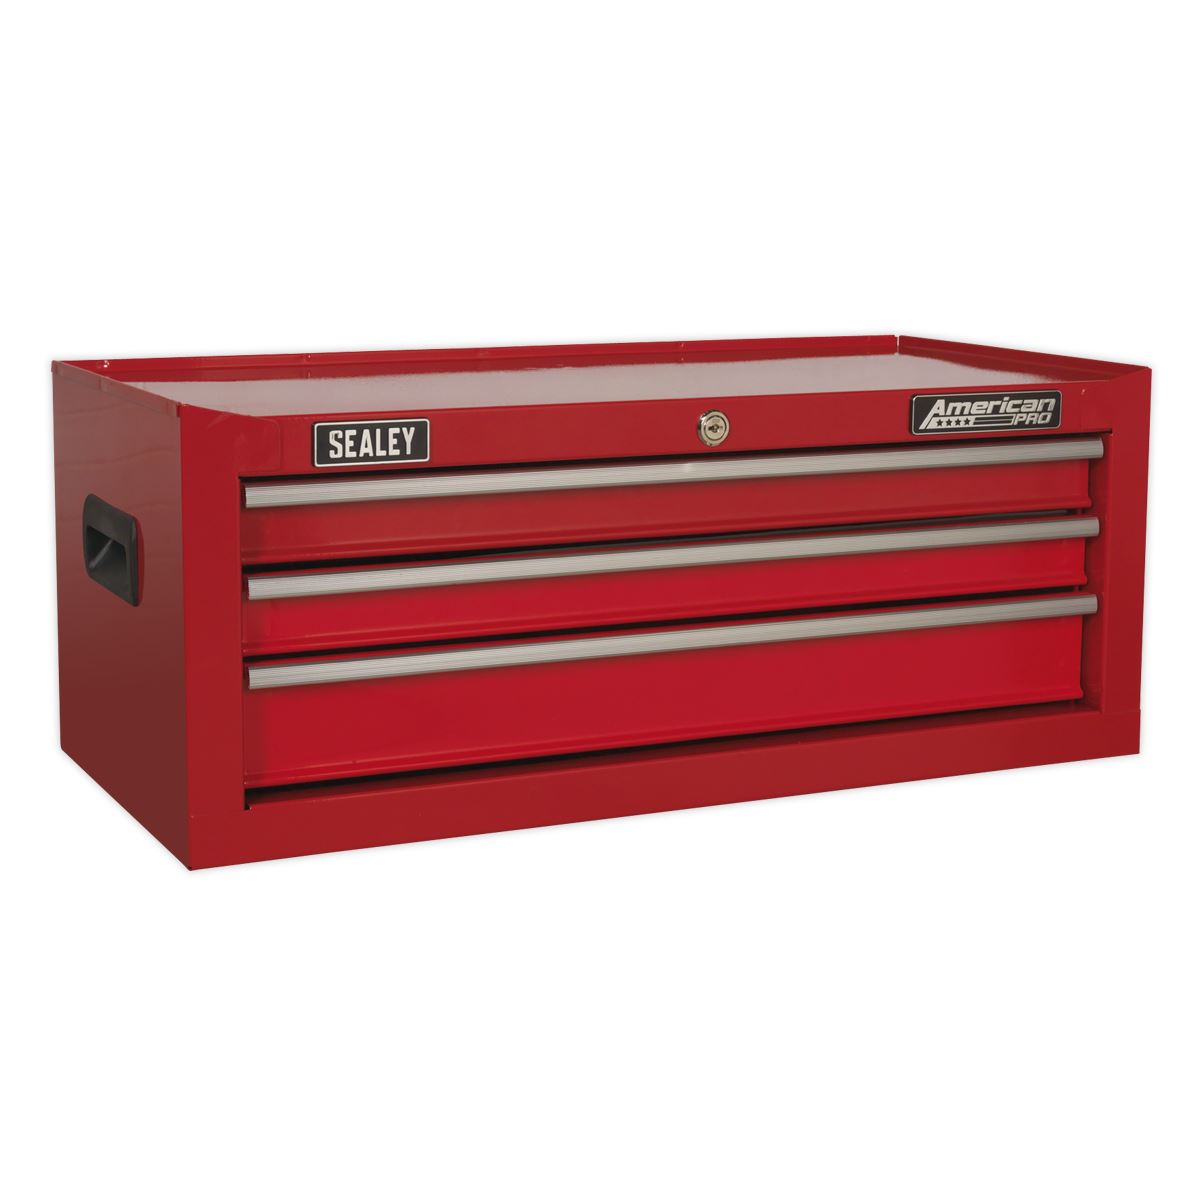 Sealey American Pro Mid-Box Tool Chest 3 Drawer with Ball-Bearing Slides - Red